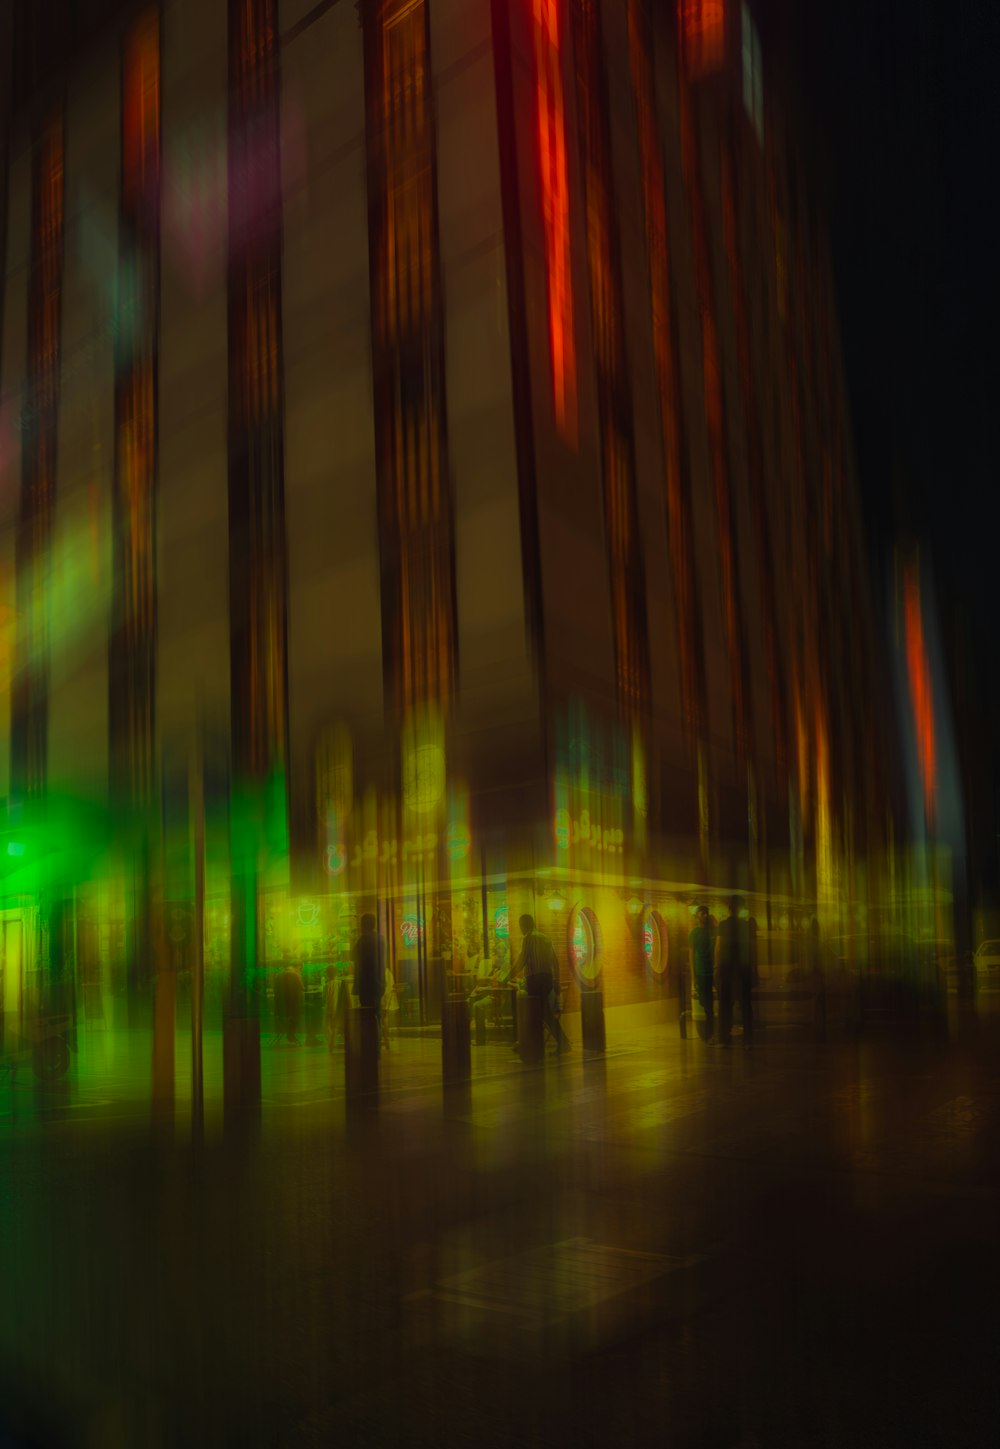 a blurry photo of a city street at night